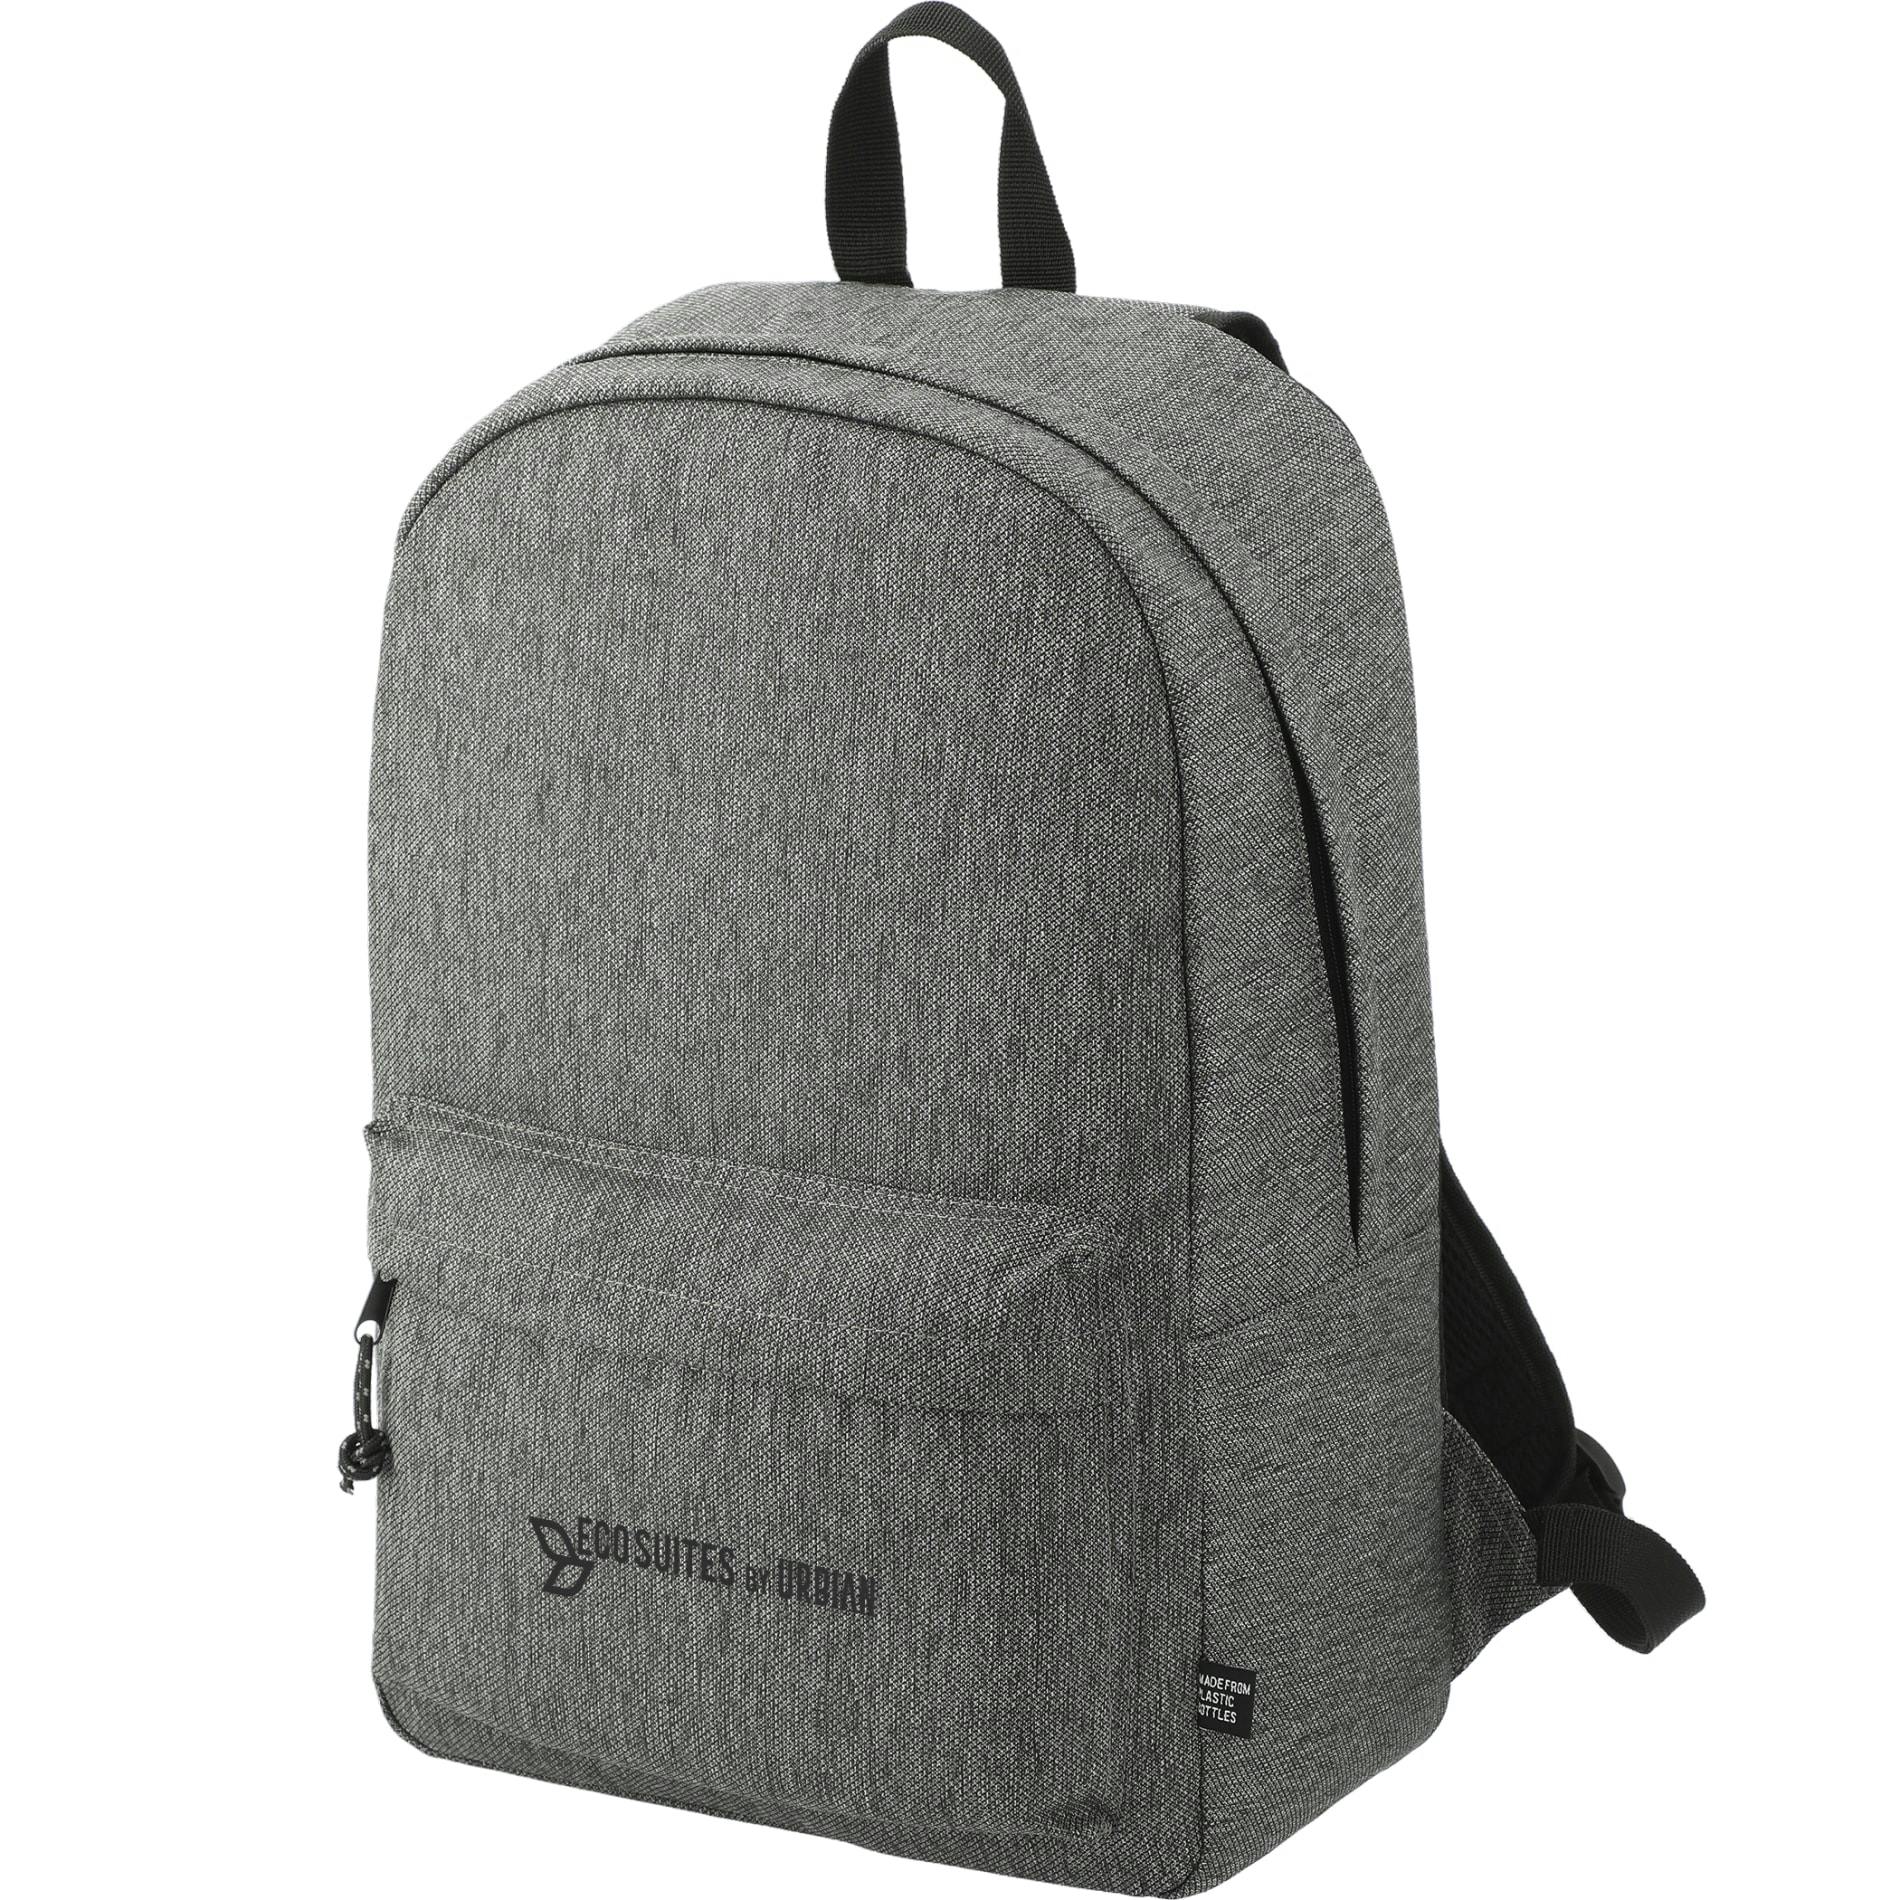 Vila Recycled 15" Computer Backpack - additional Image 2